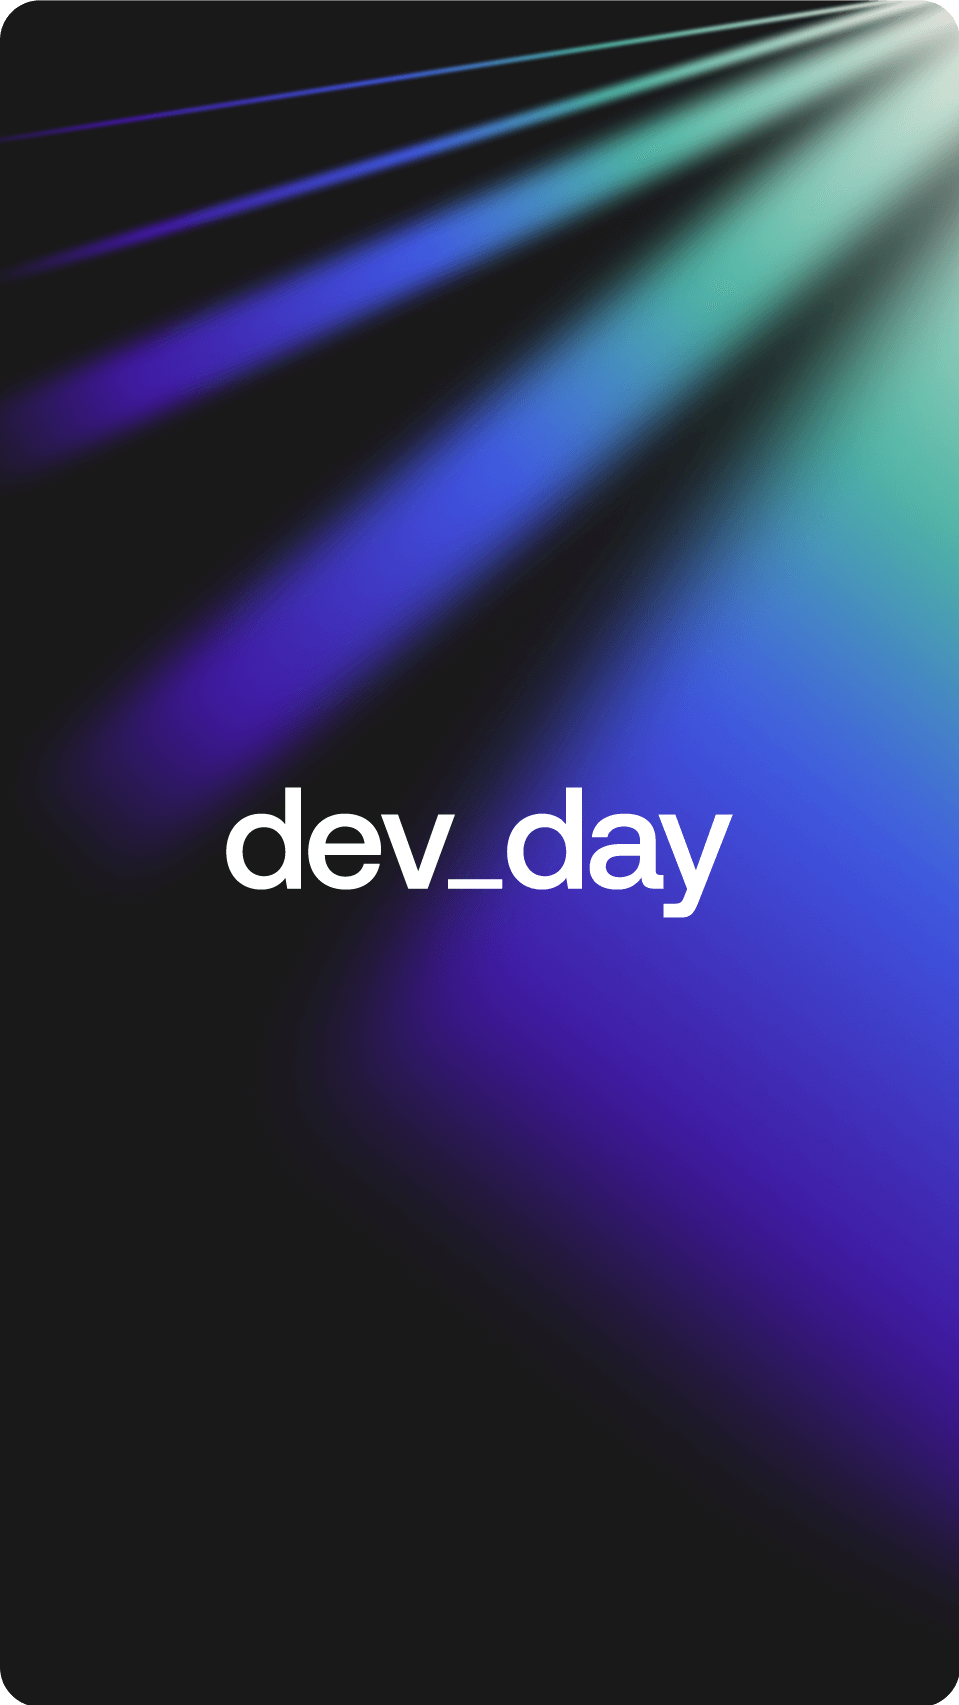 DevDay logo with a dark background that has beaming lights circling around, evoking feeling underwater or looking at the aurora borealis